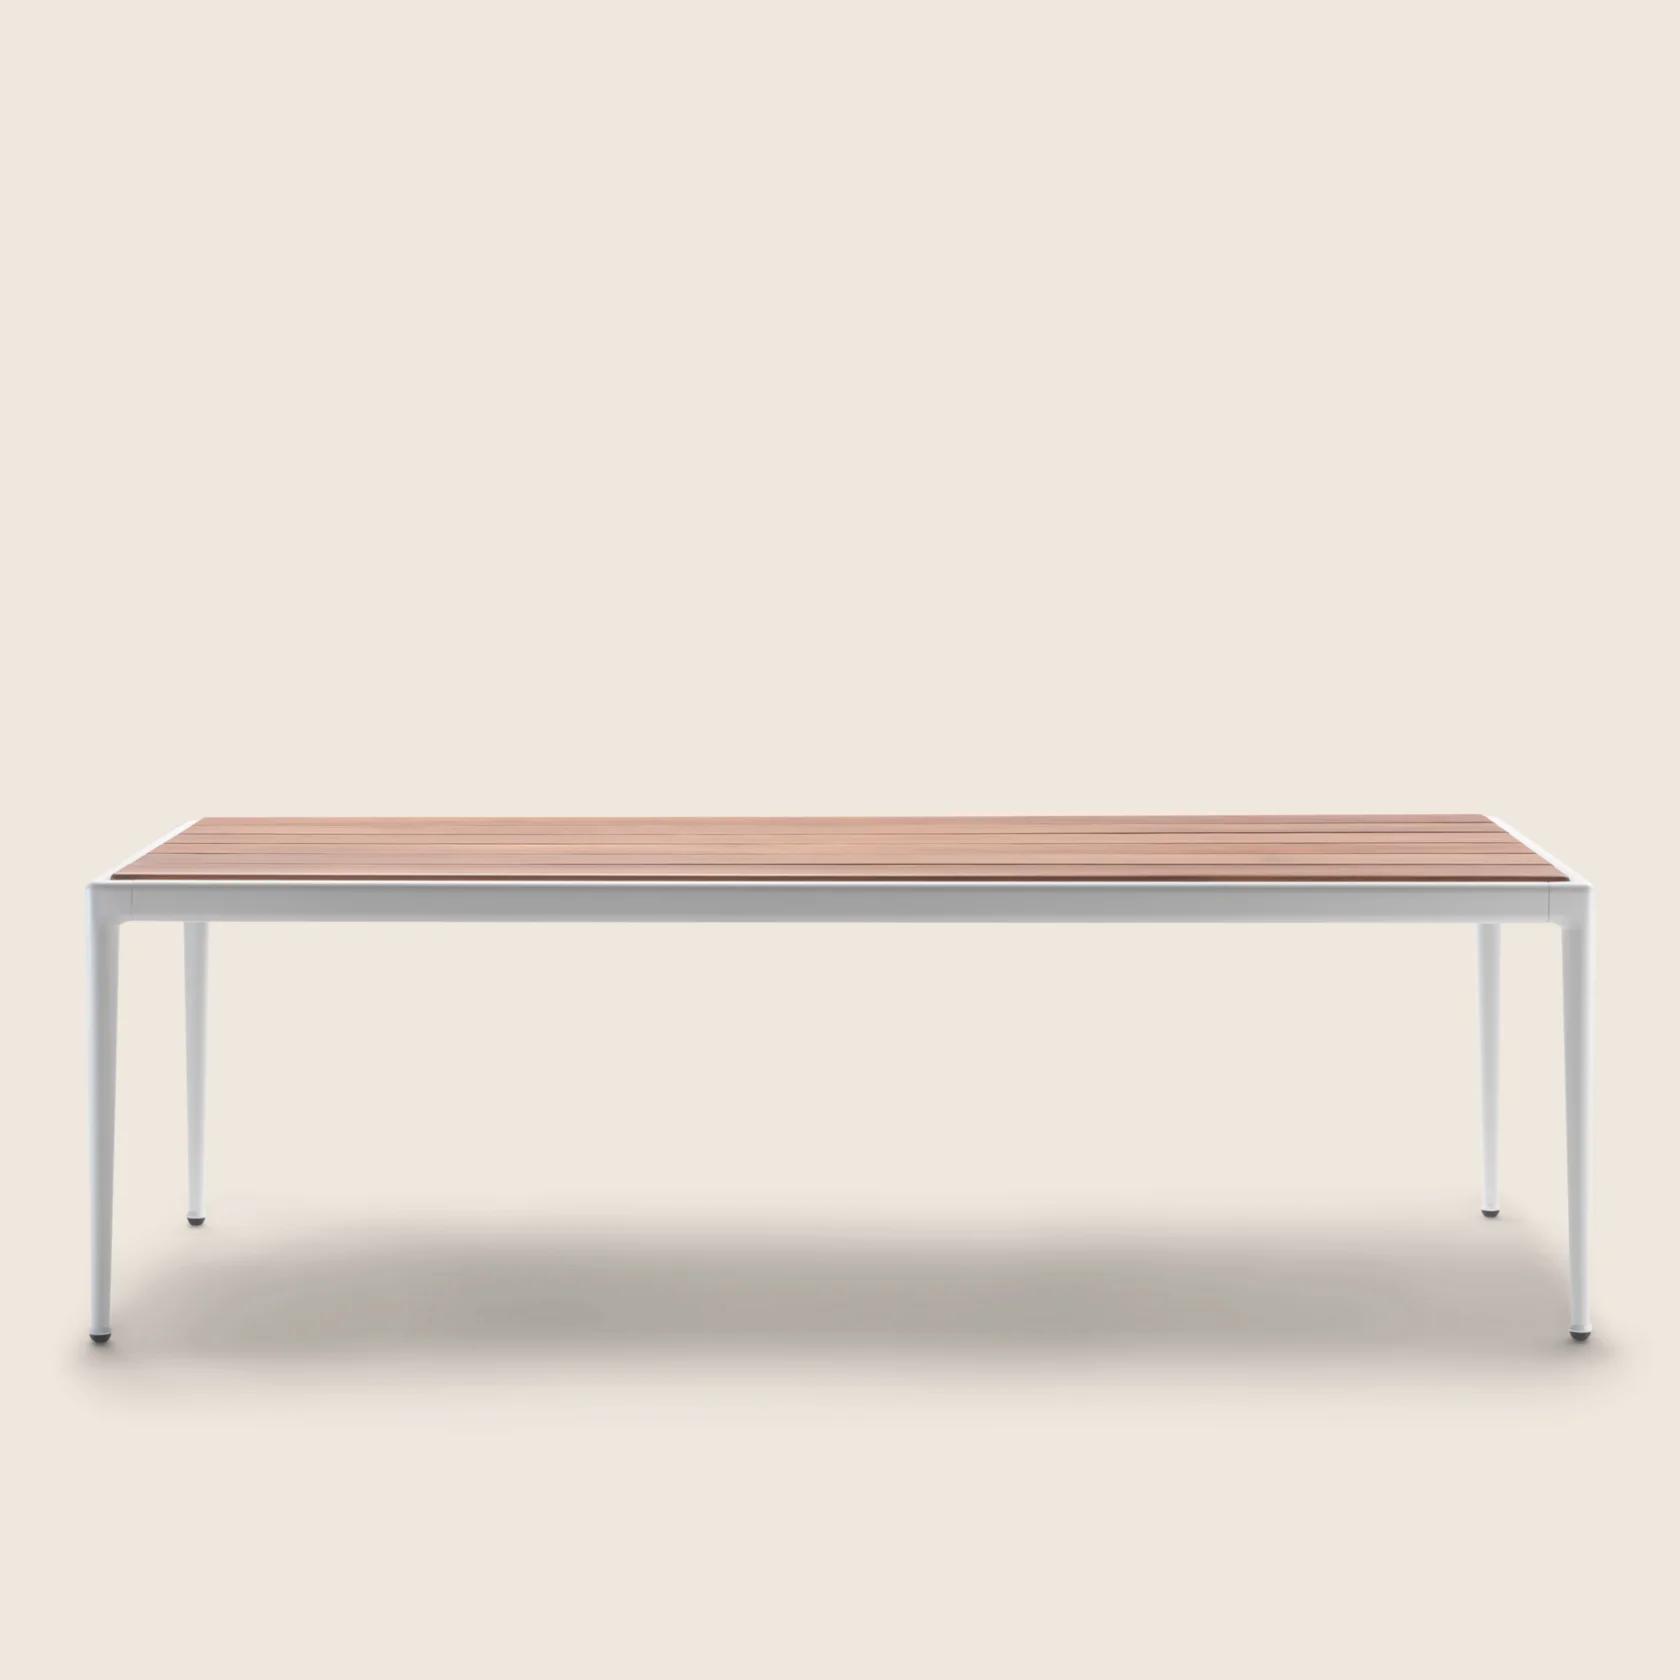 0283L0_PICO OUTDOOR_TABLE_05.png